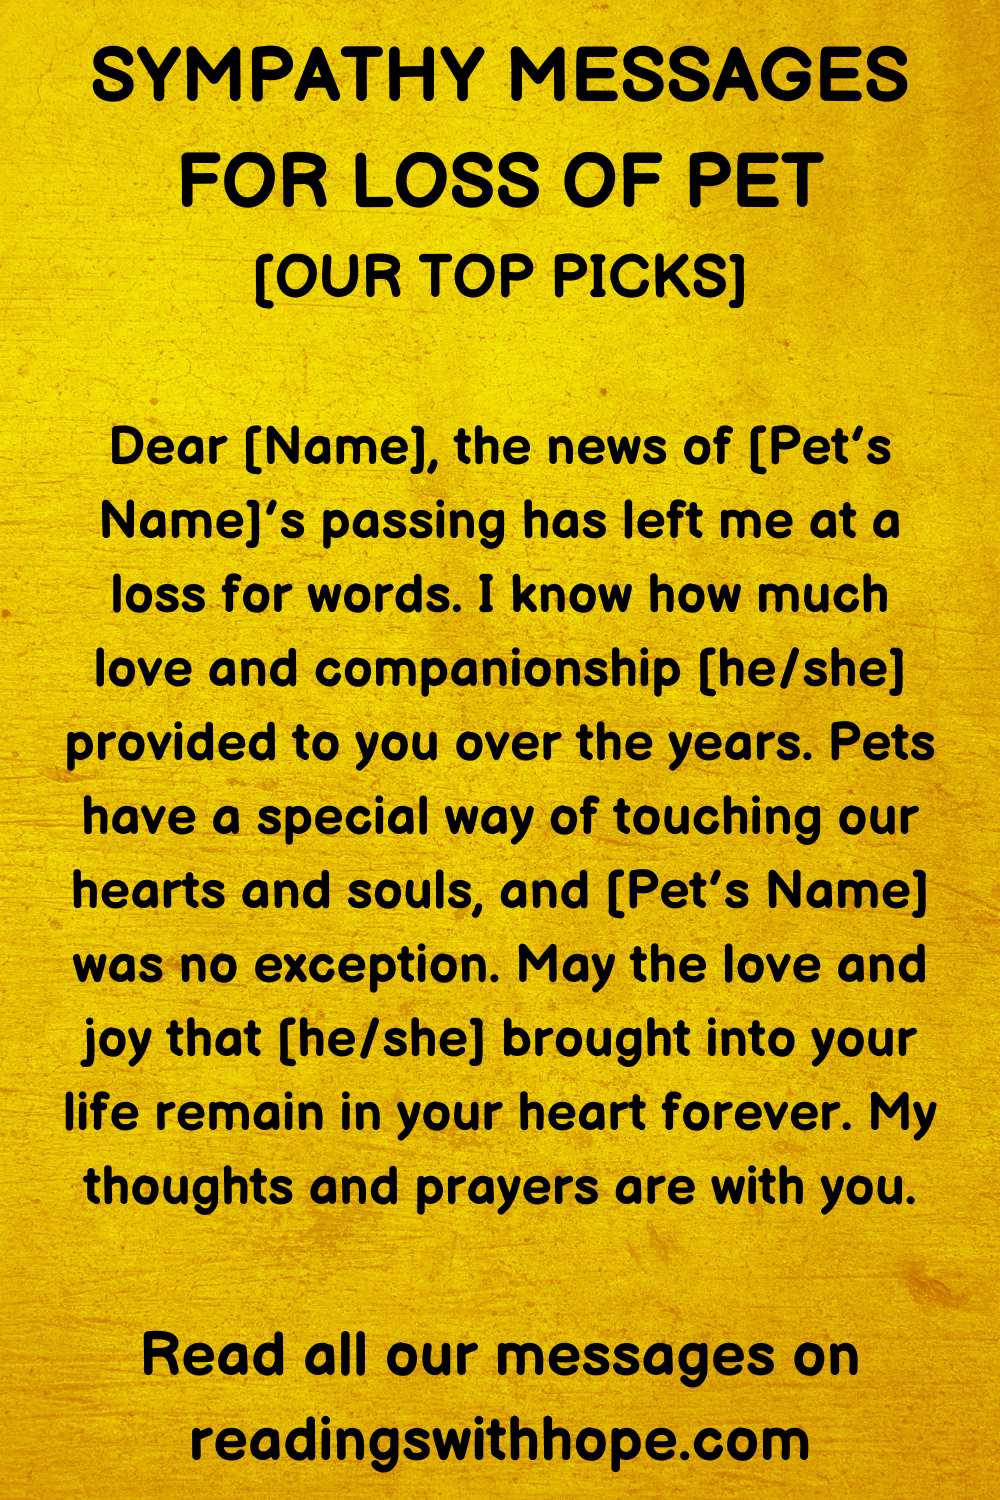 Sympathy Message for Loss of a Pet